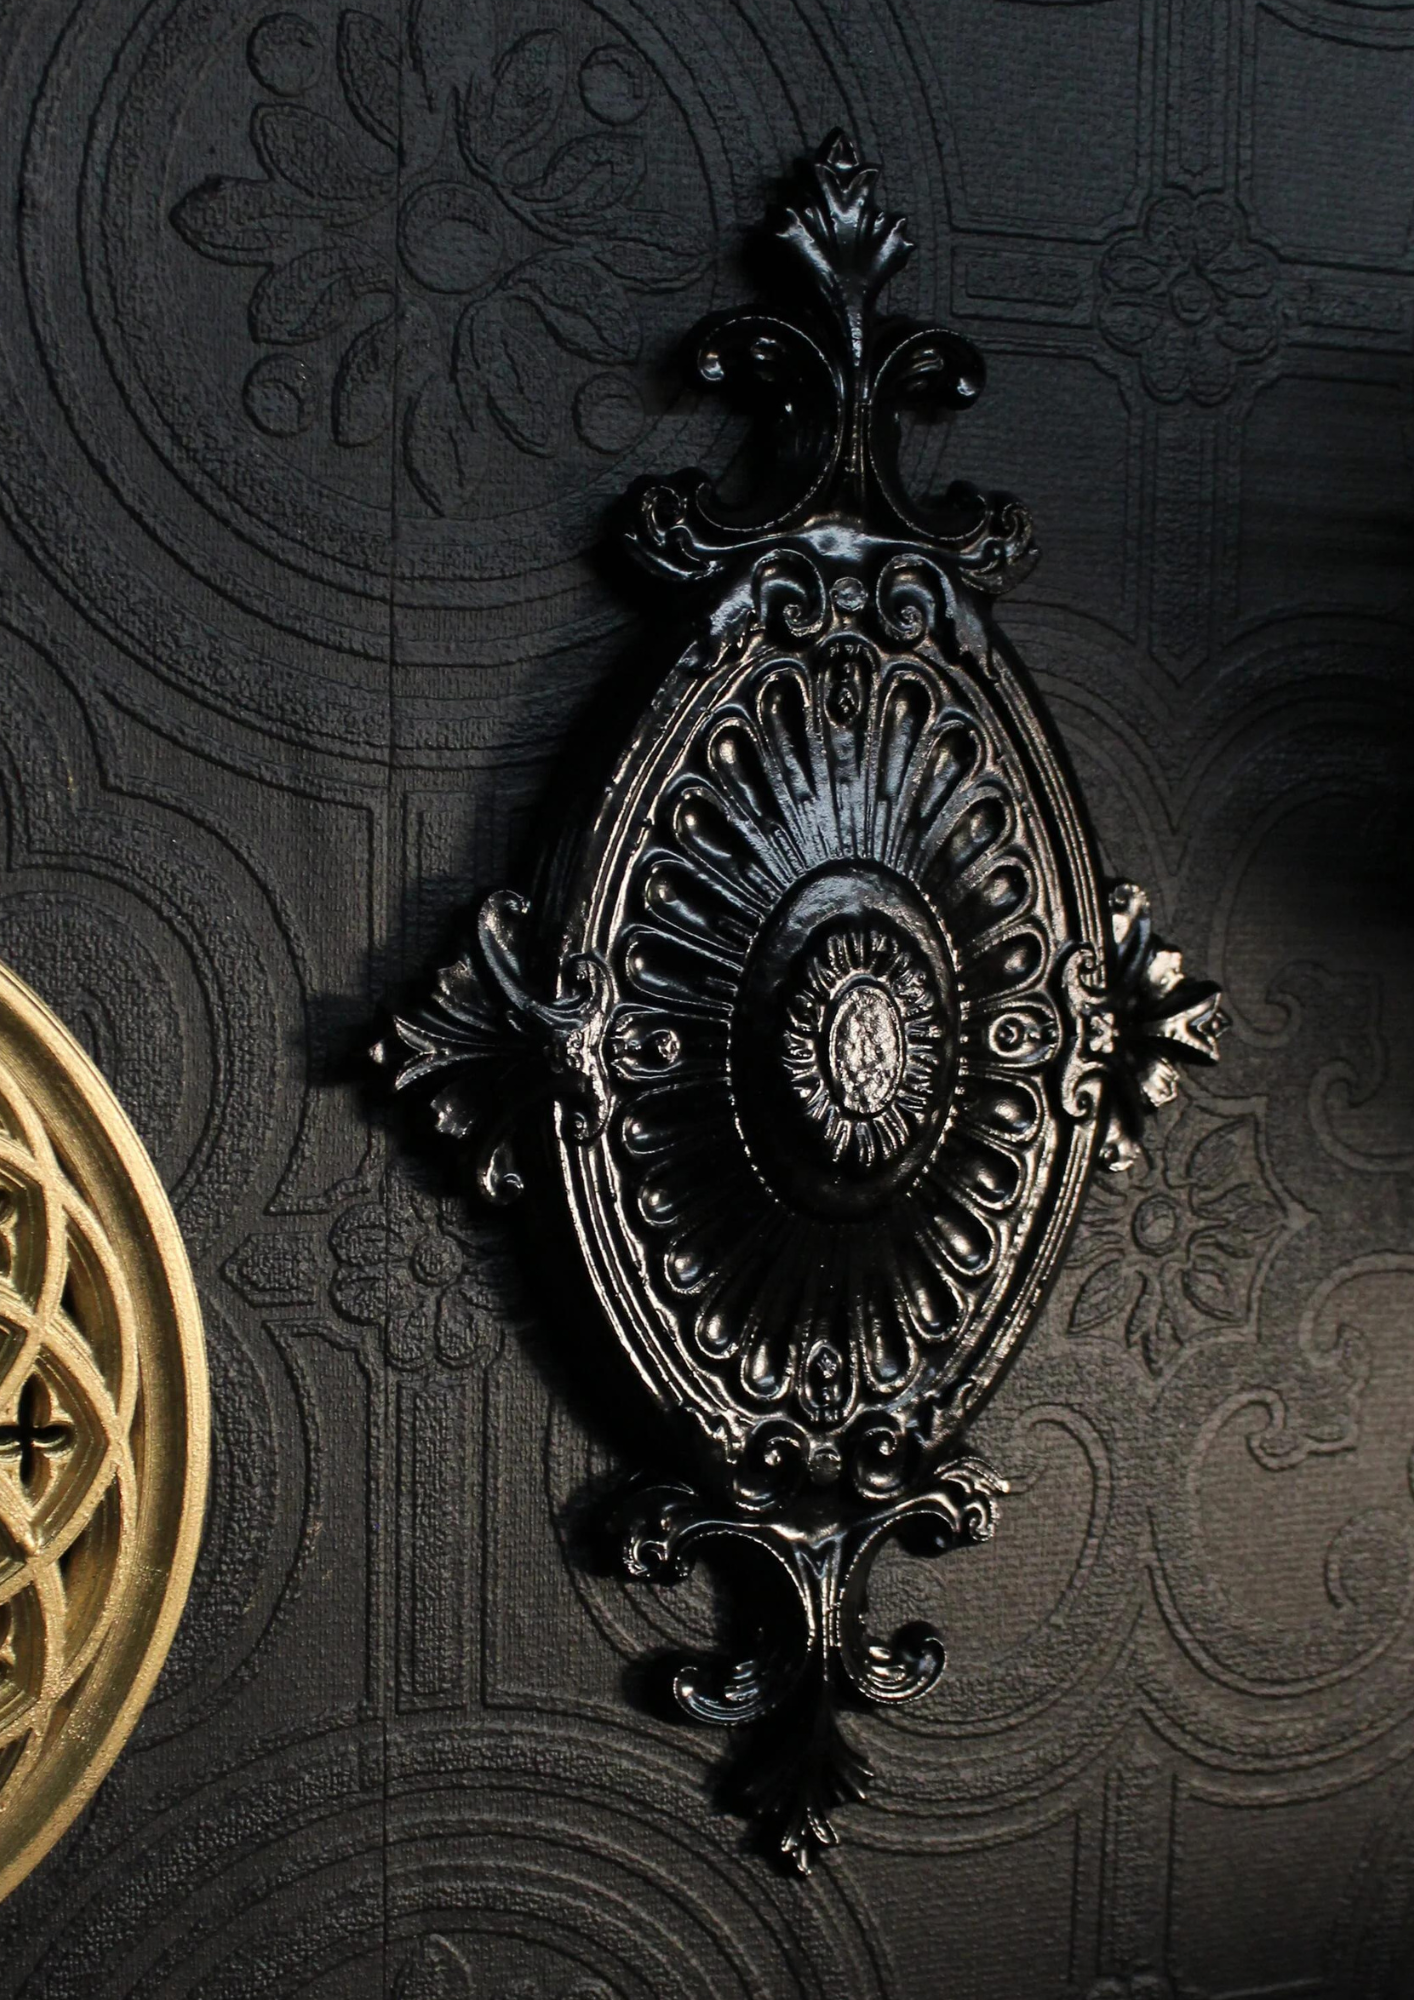 Reign - Baroque Wall Plaque by The Blackened Teeth